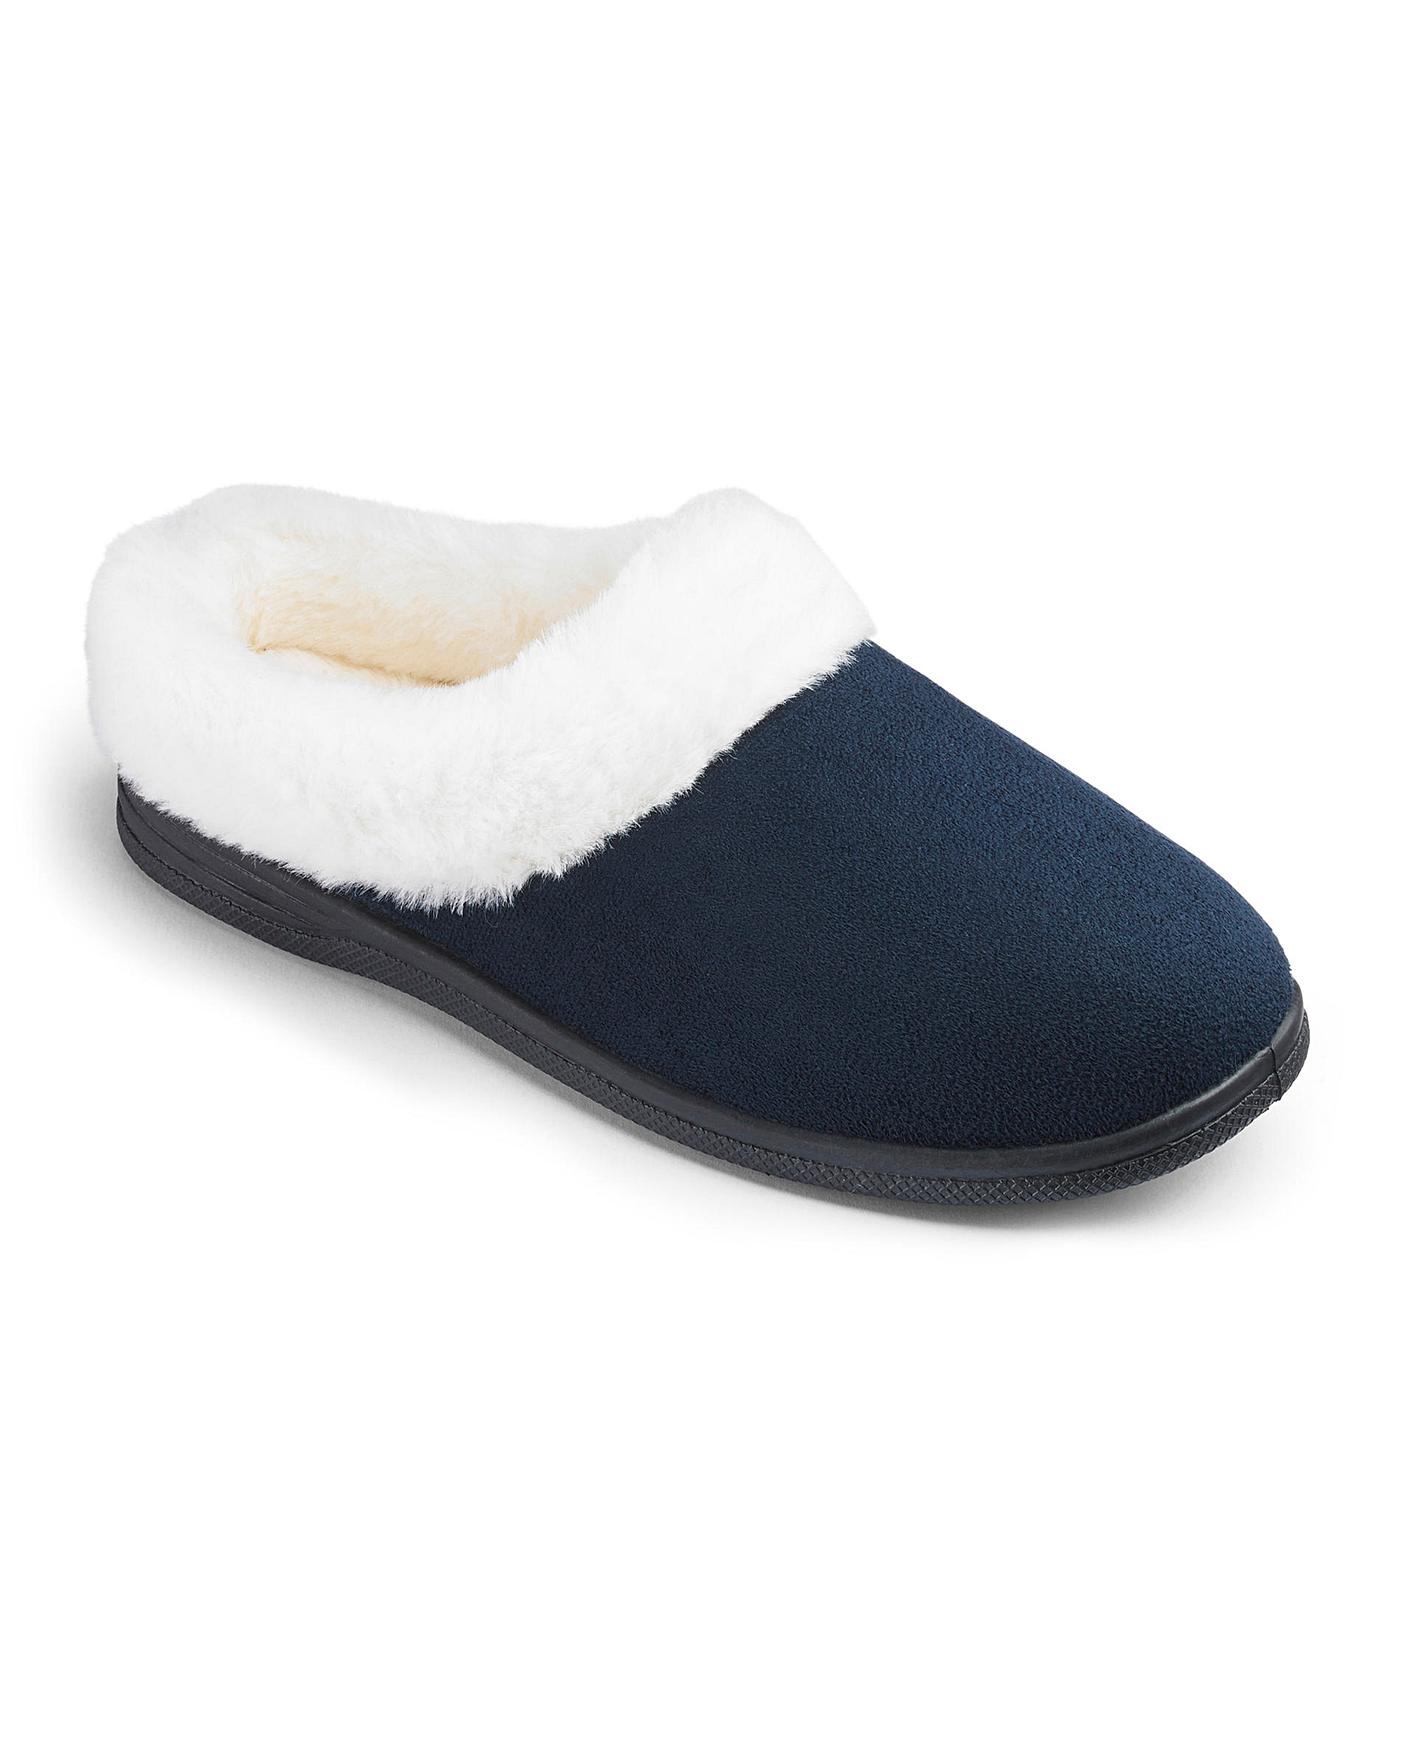 Cushion Walk Mule Slippers E Fit | Oxendales